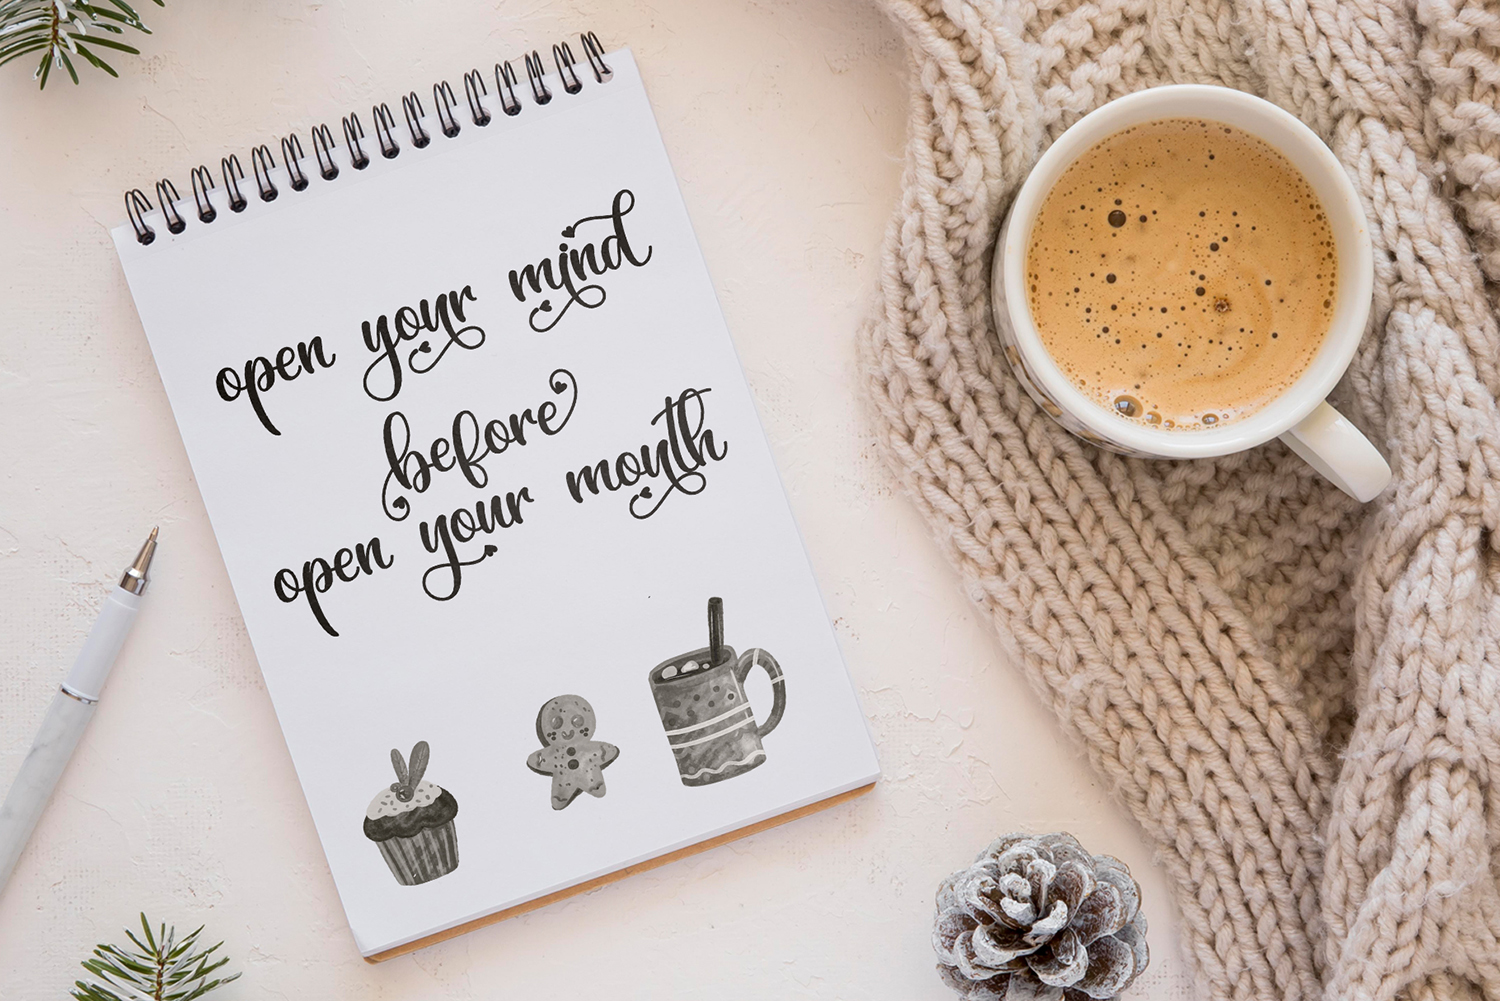 Andyou Free Font